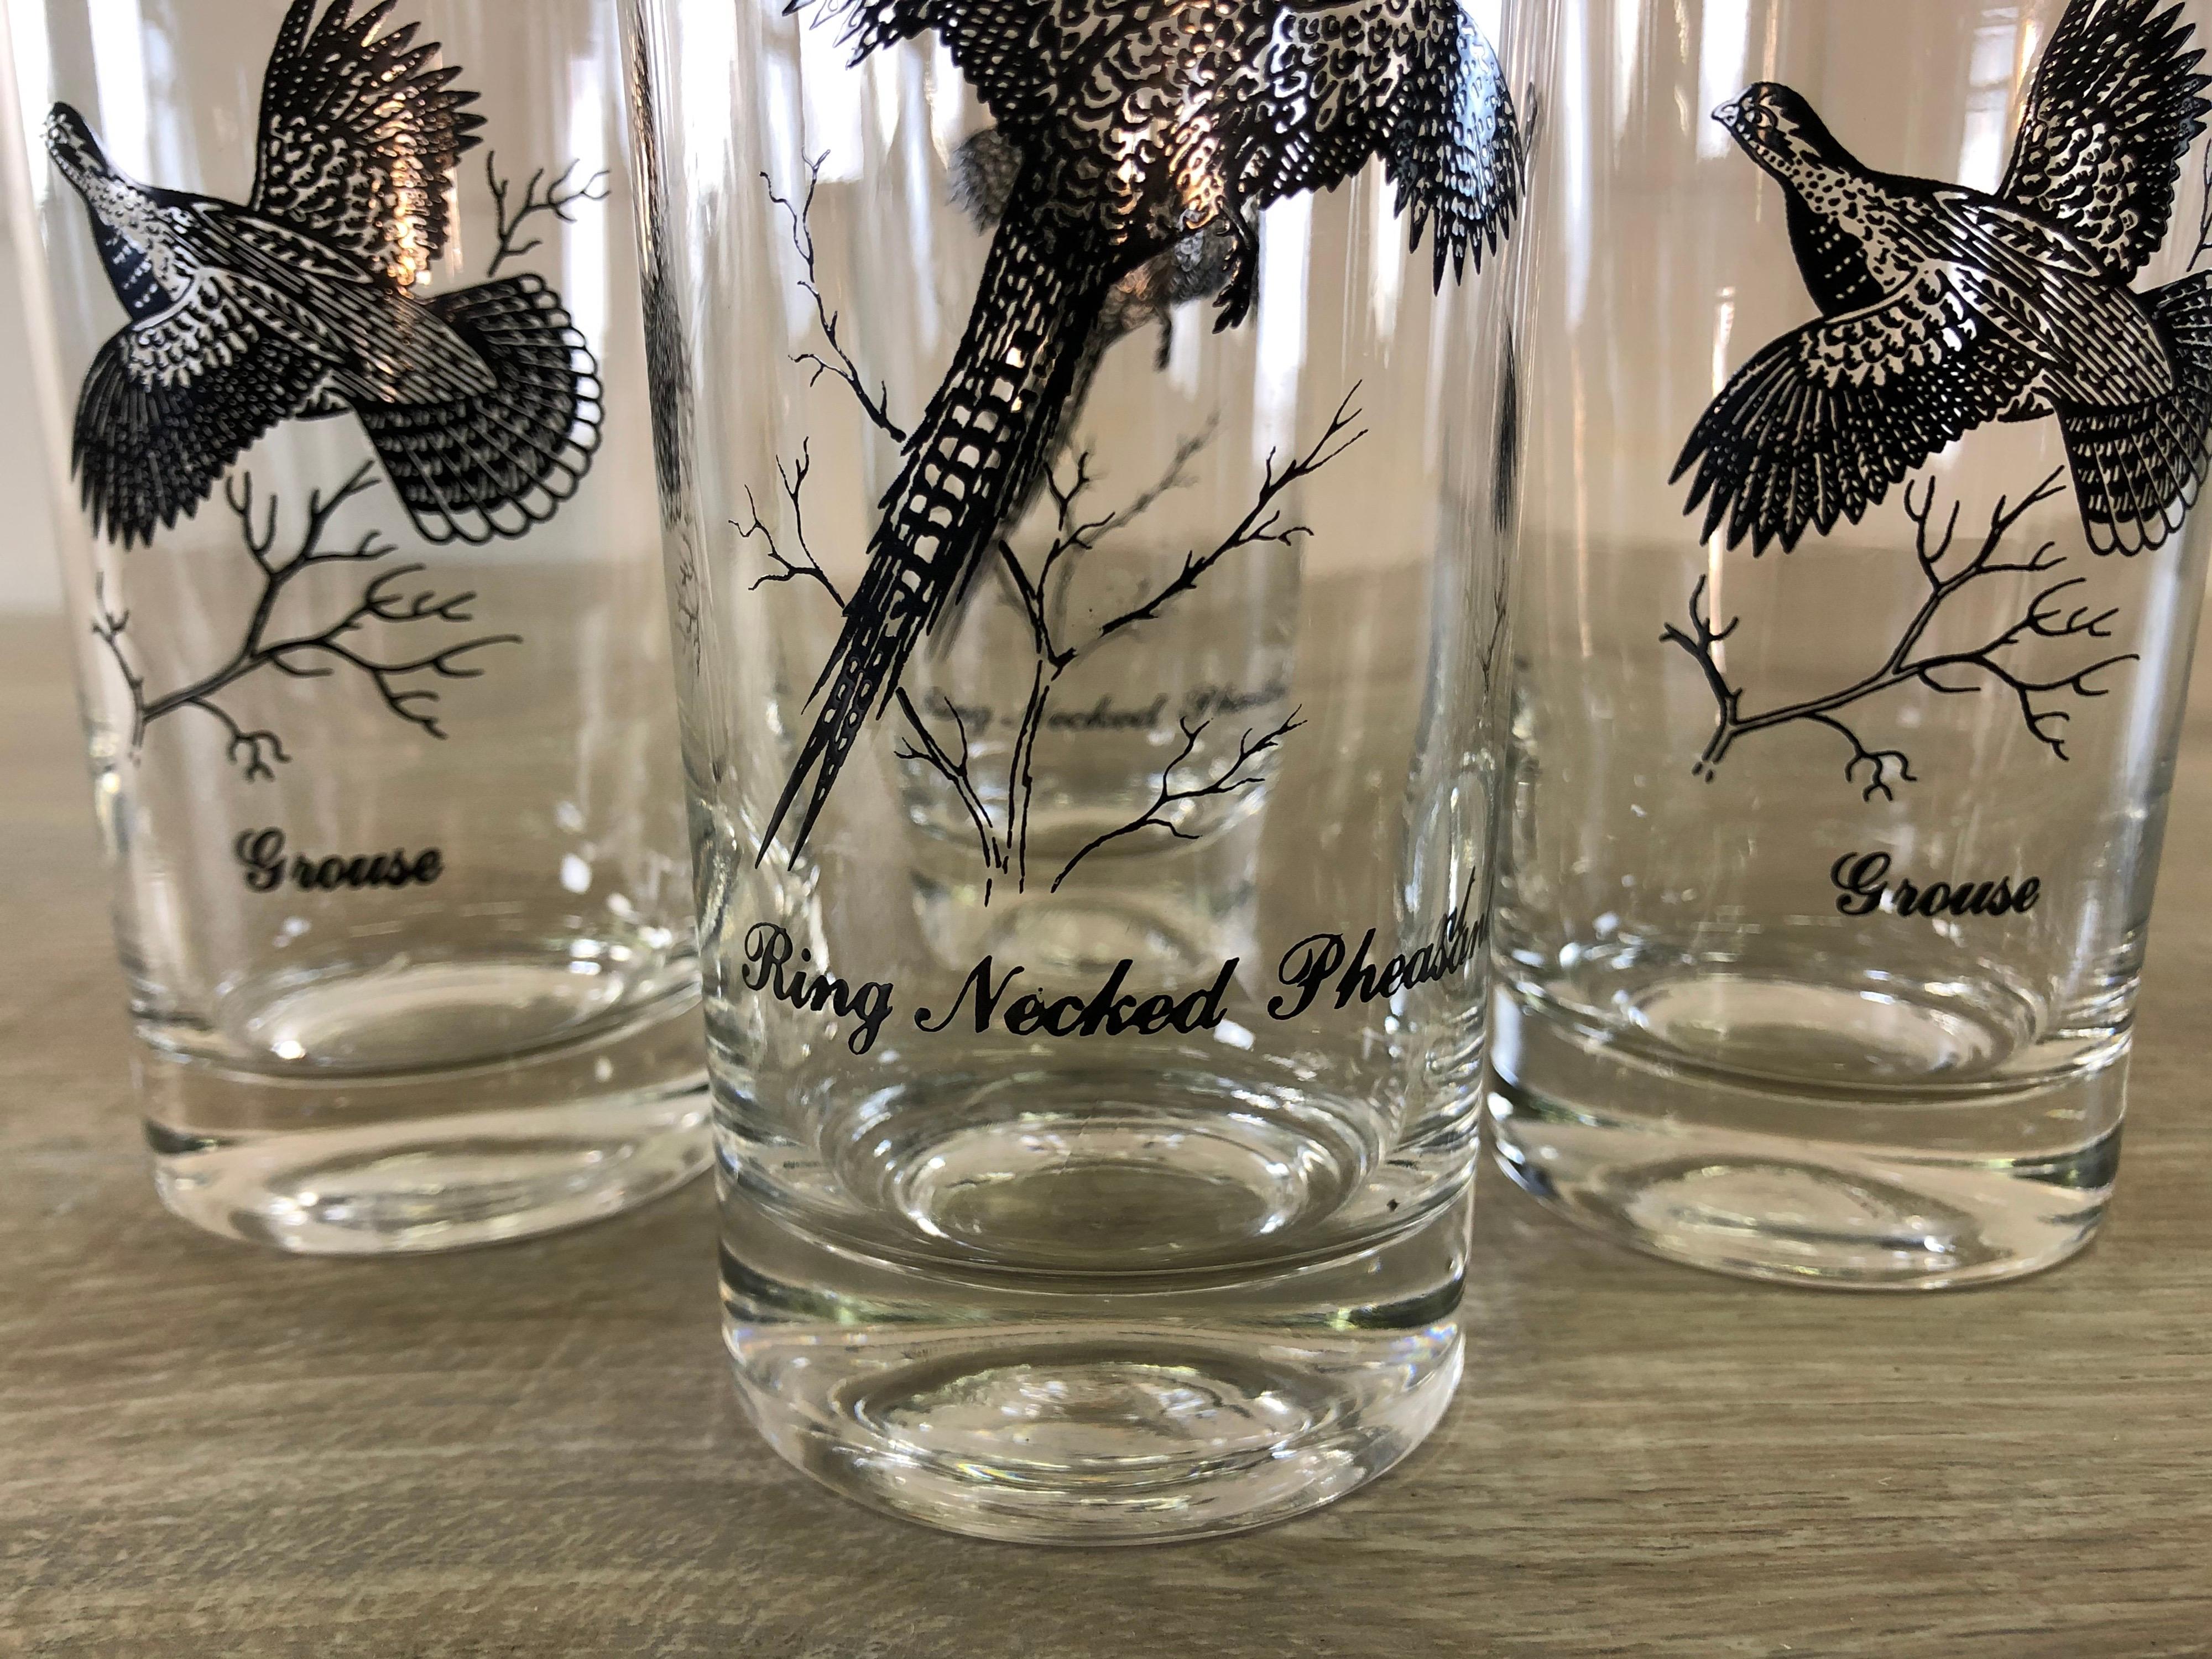 Vintage 1960s set of four silver game bird drinking glasses. Two glasses are pheasant and two are grousse. No marks. All silver is strong.